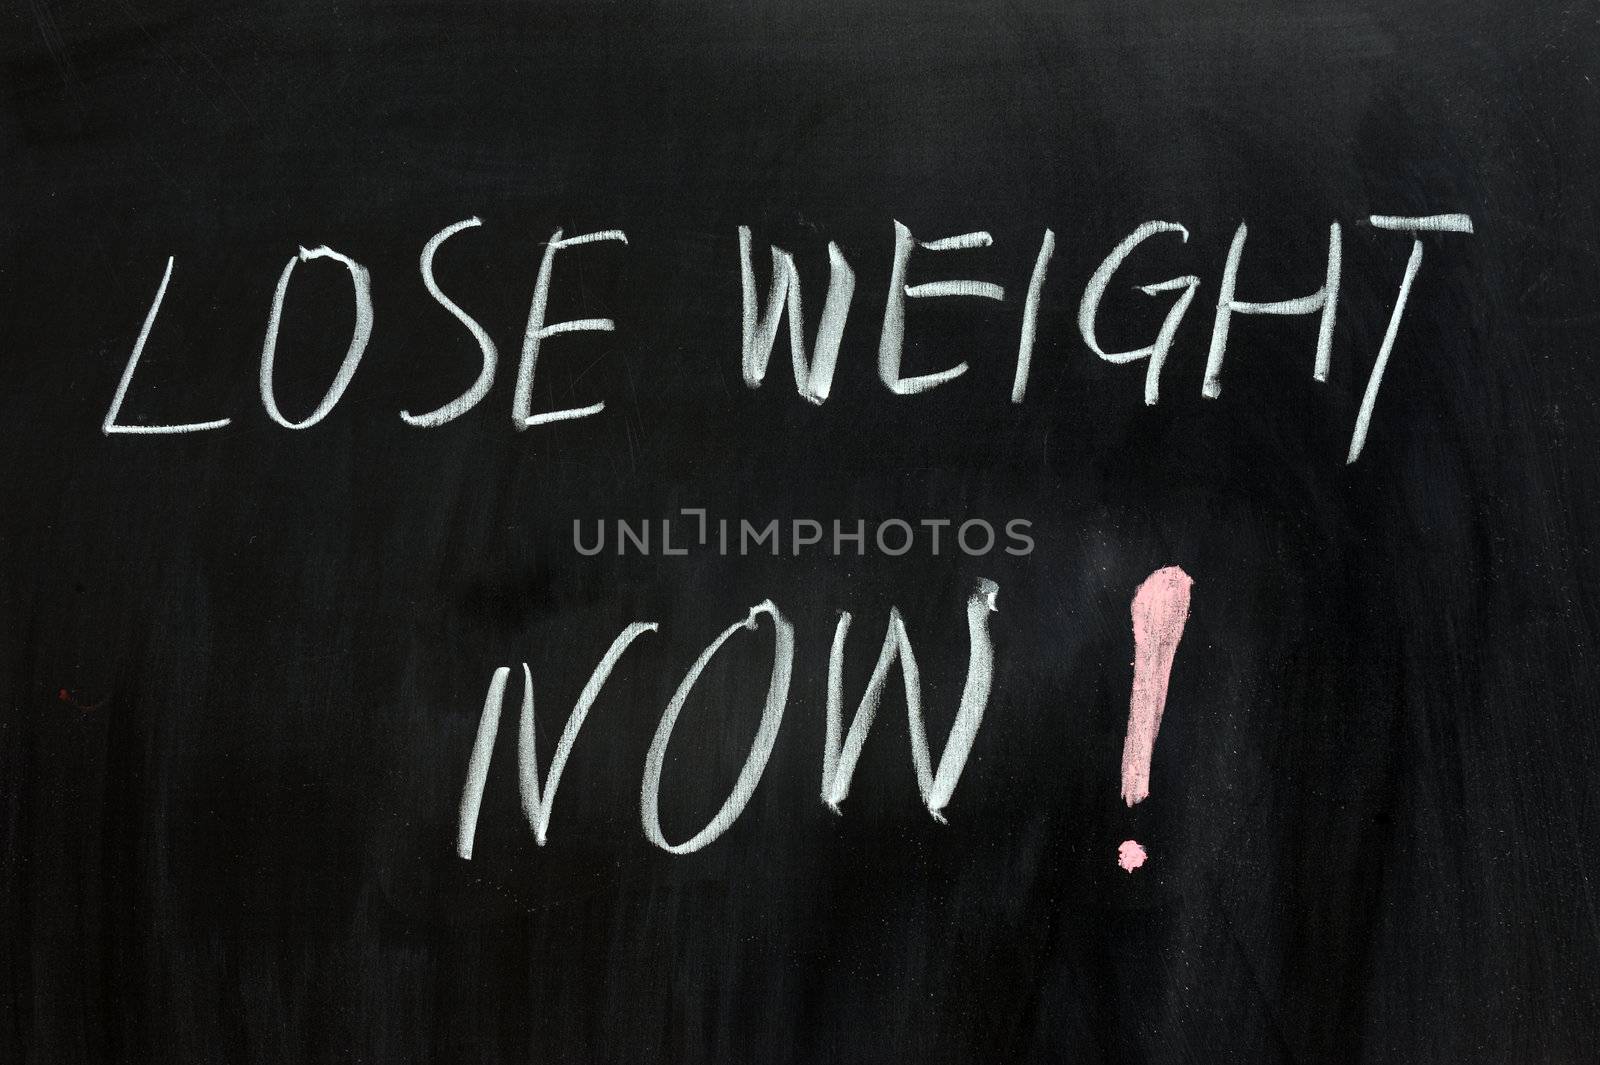 Lose weight now by raywoo